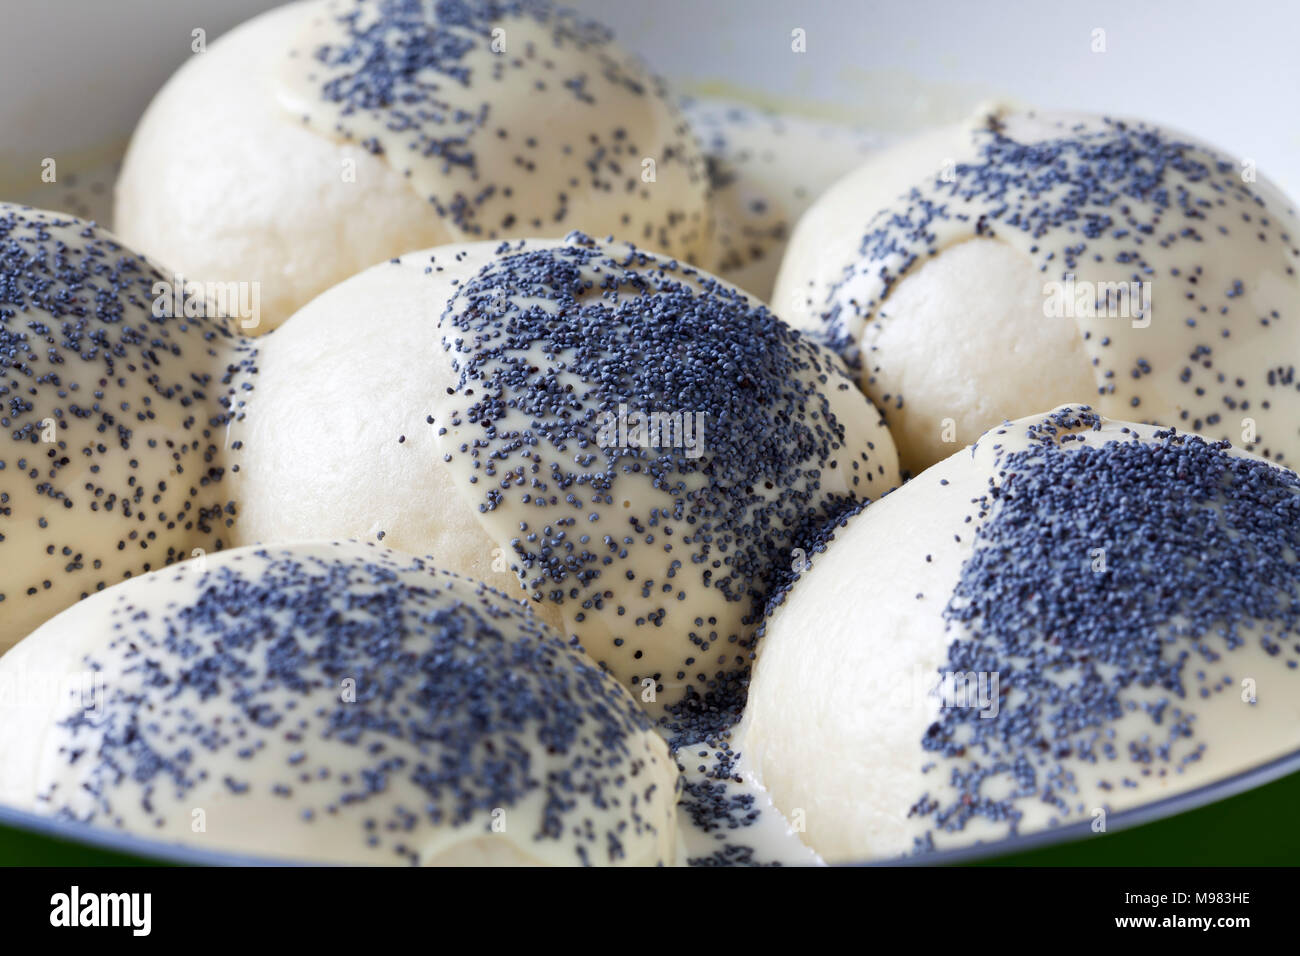 Pan of prepared yeast dumpling in vanilla sauce sprinkled with poppy seed, close-up Stock Photo